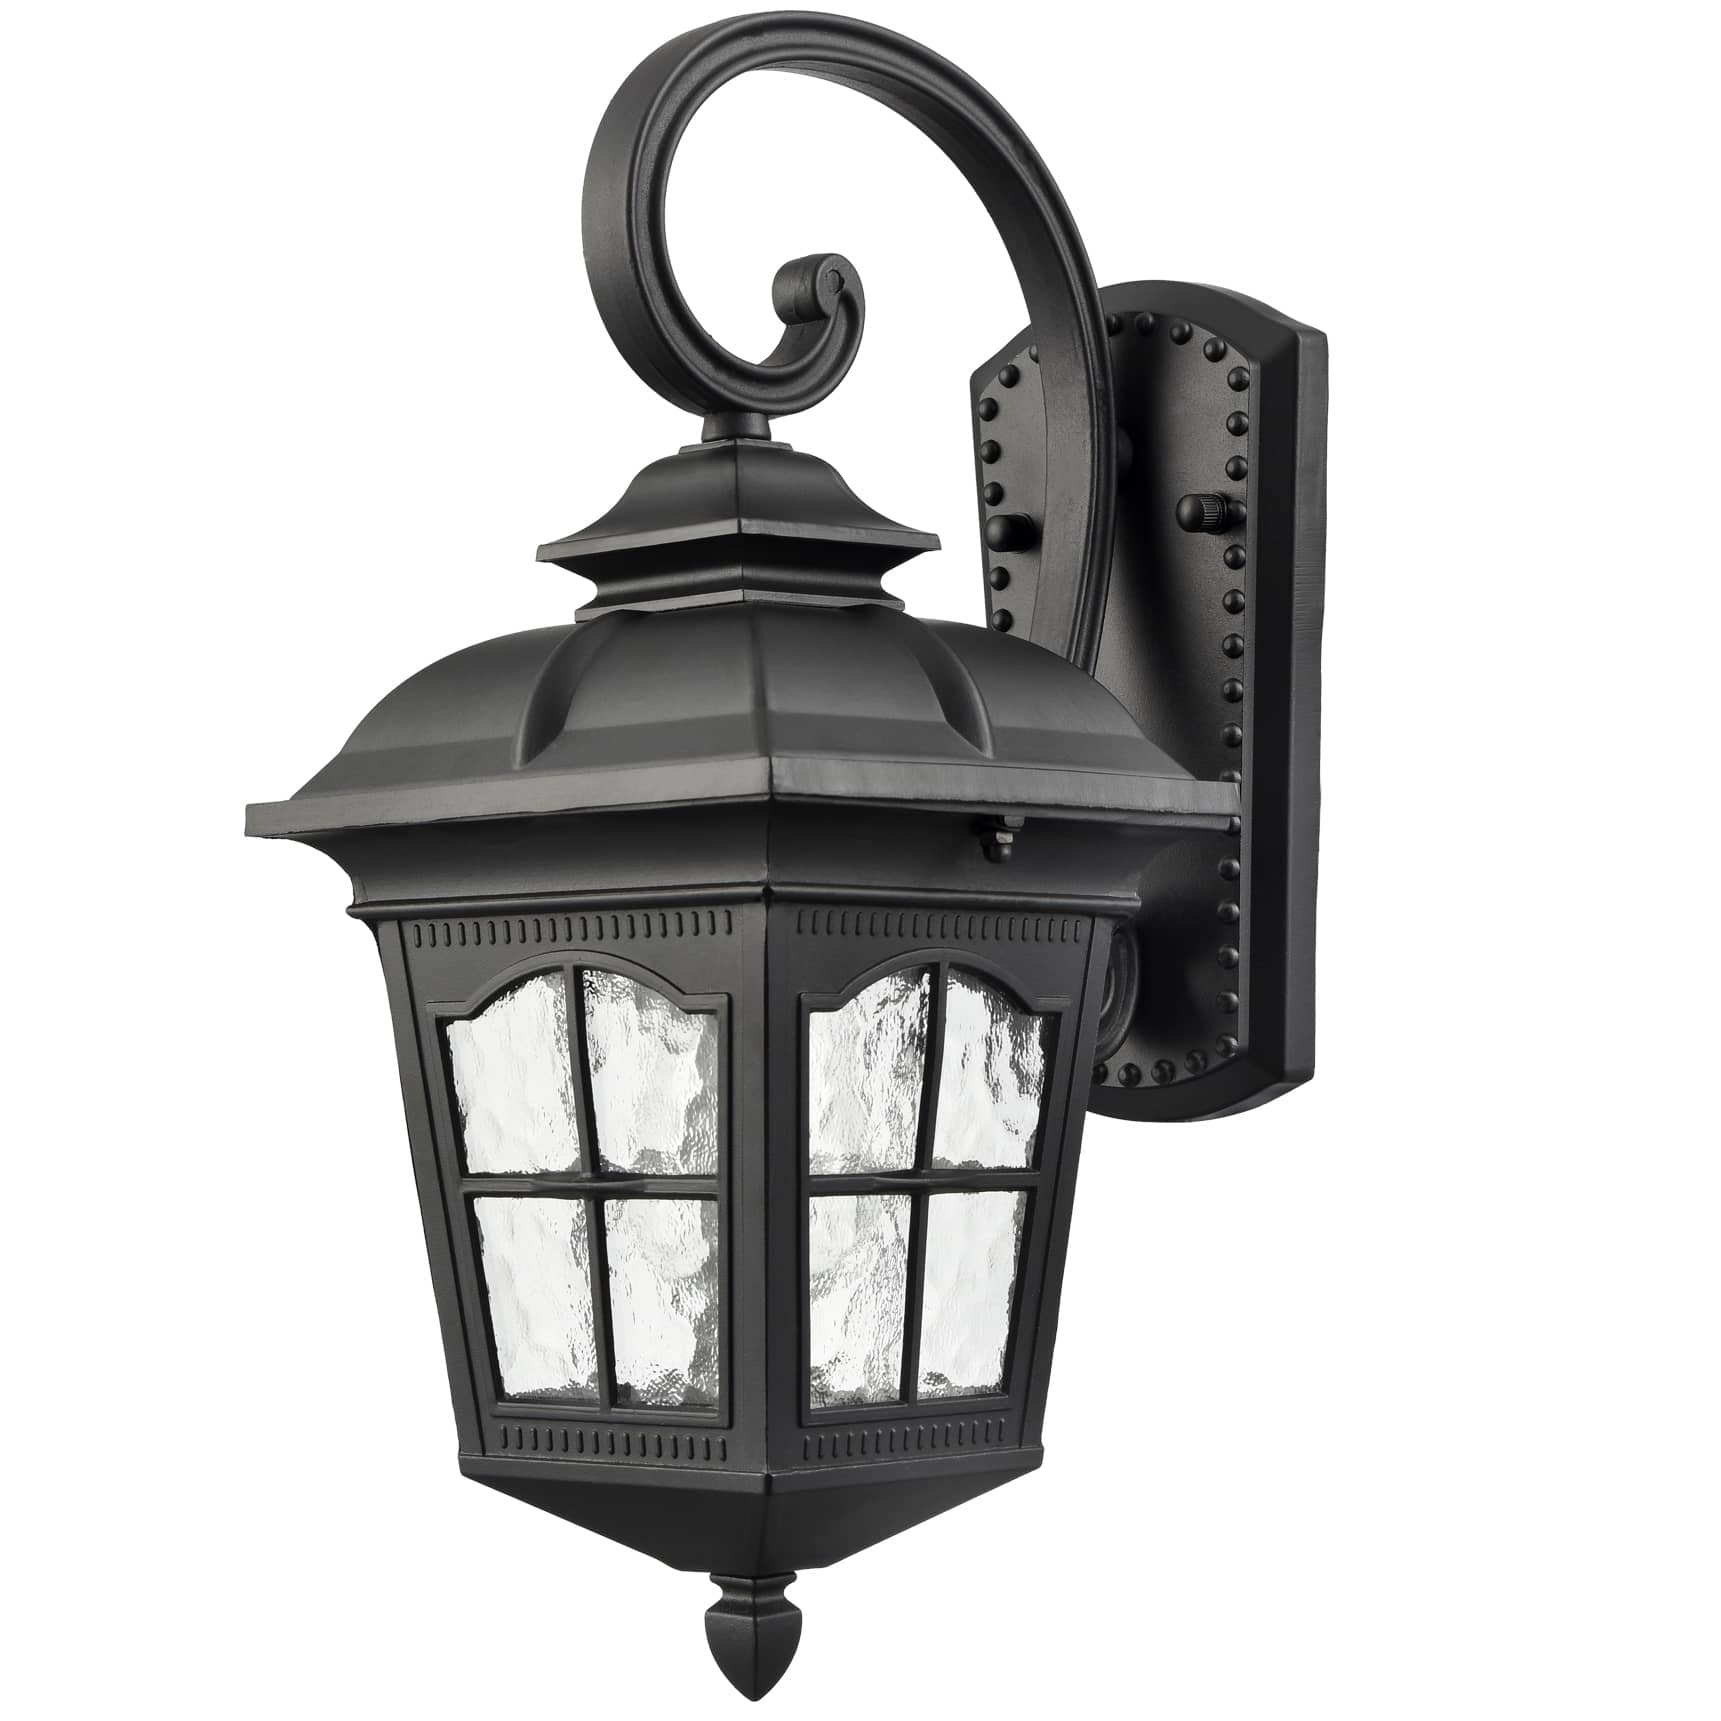 Turist fordel violin Outdoor Wall Lights Carriage Black Patio Porch Lighting